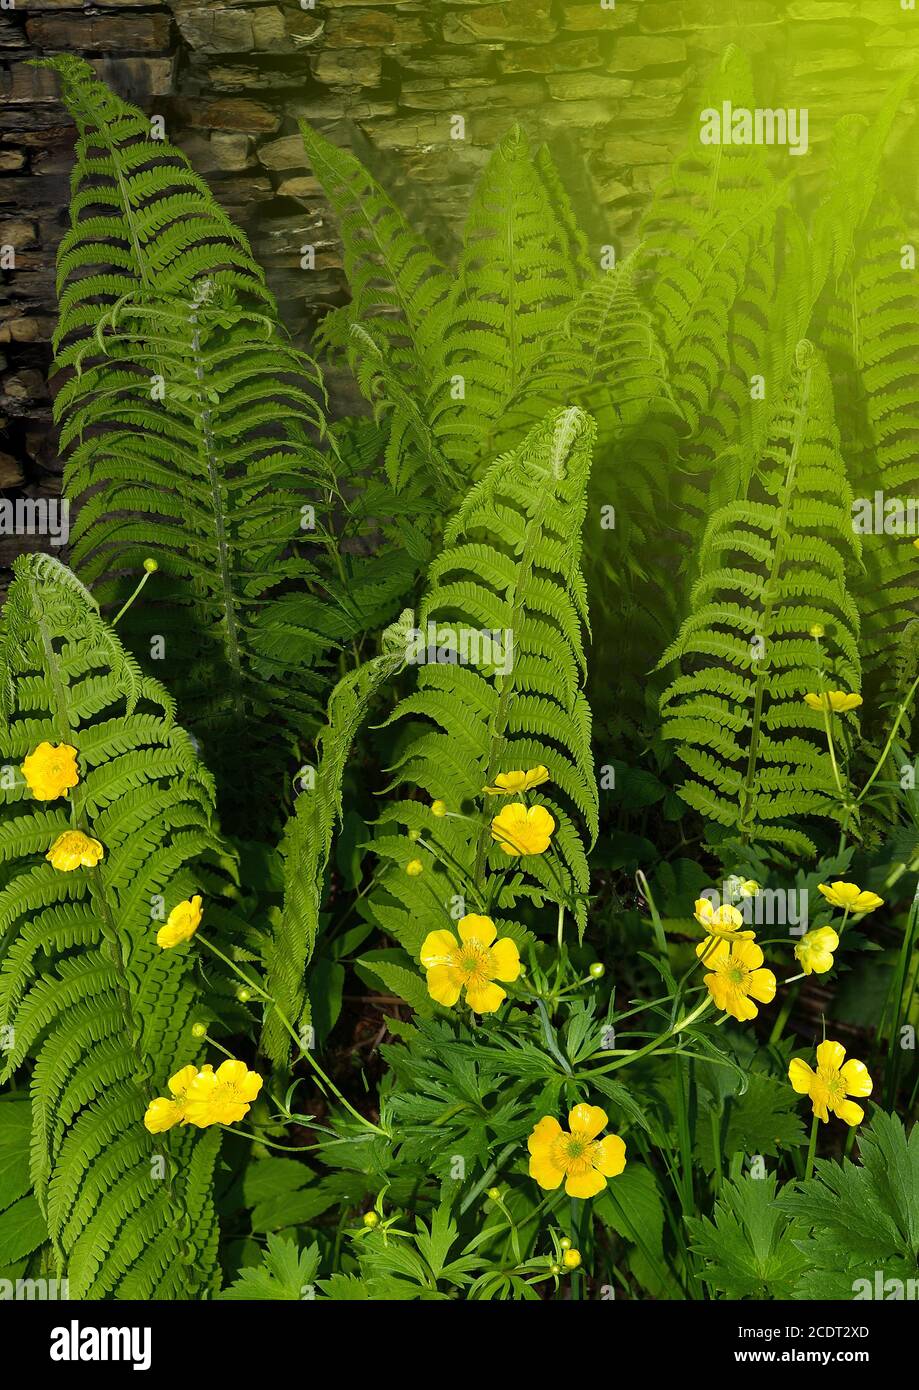 Young leaves of a fern  and delicate yellow ranunculus flowers Stock Photo